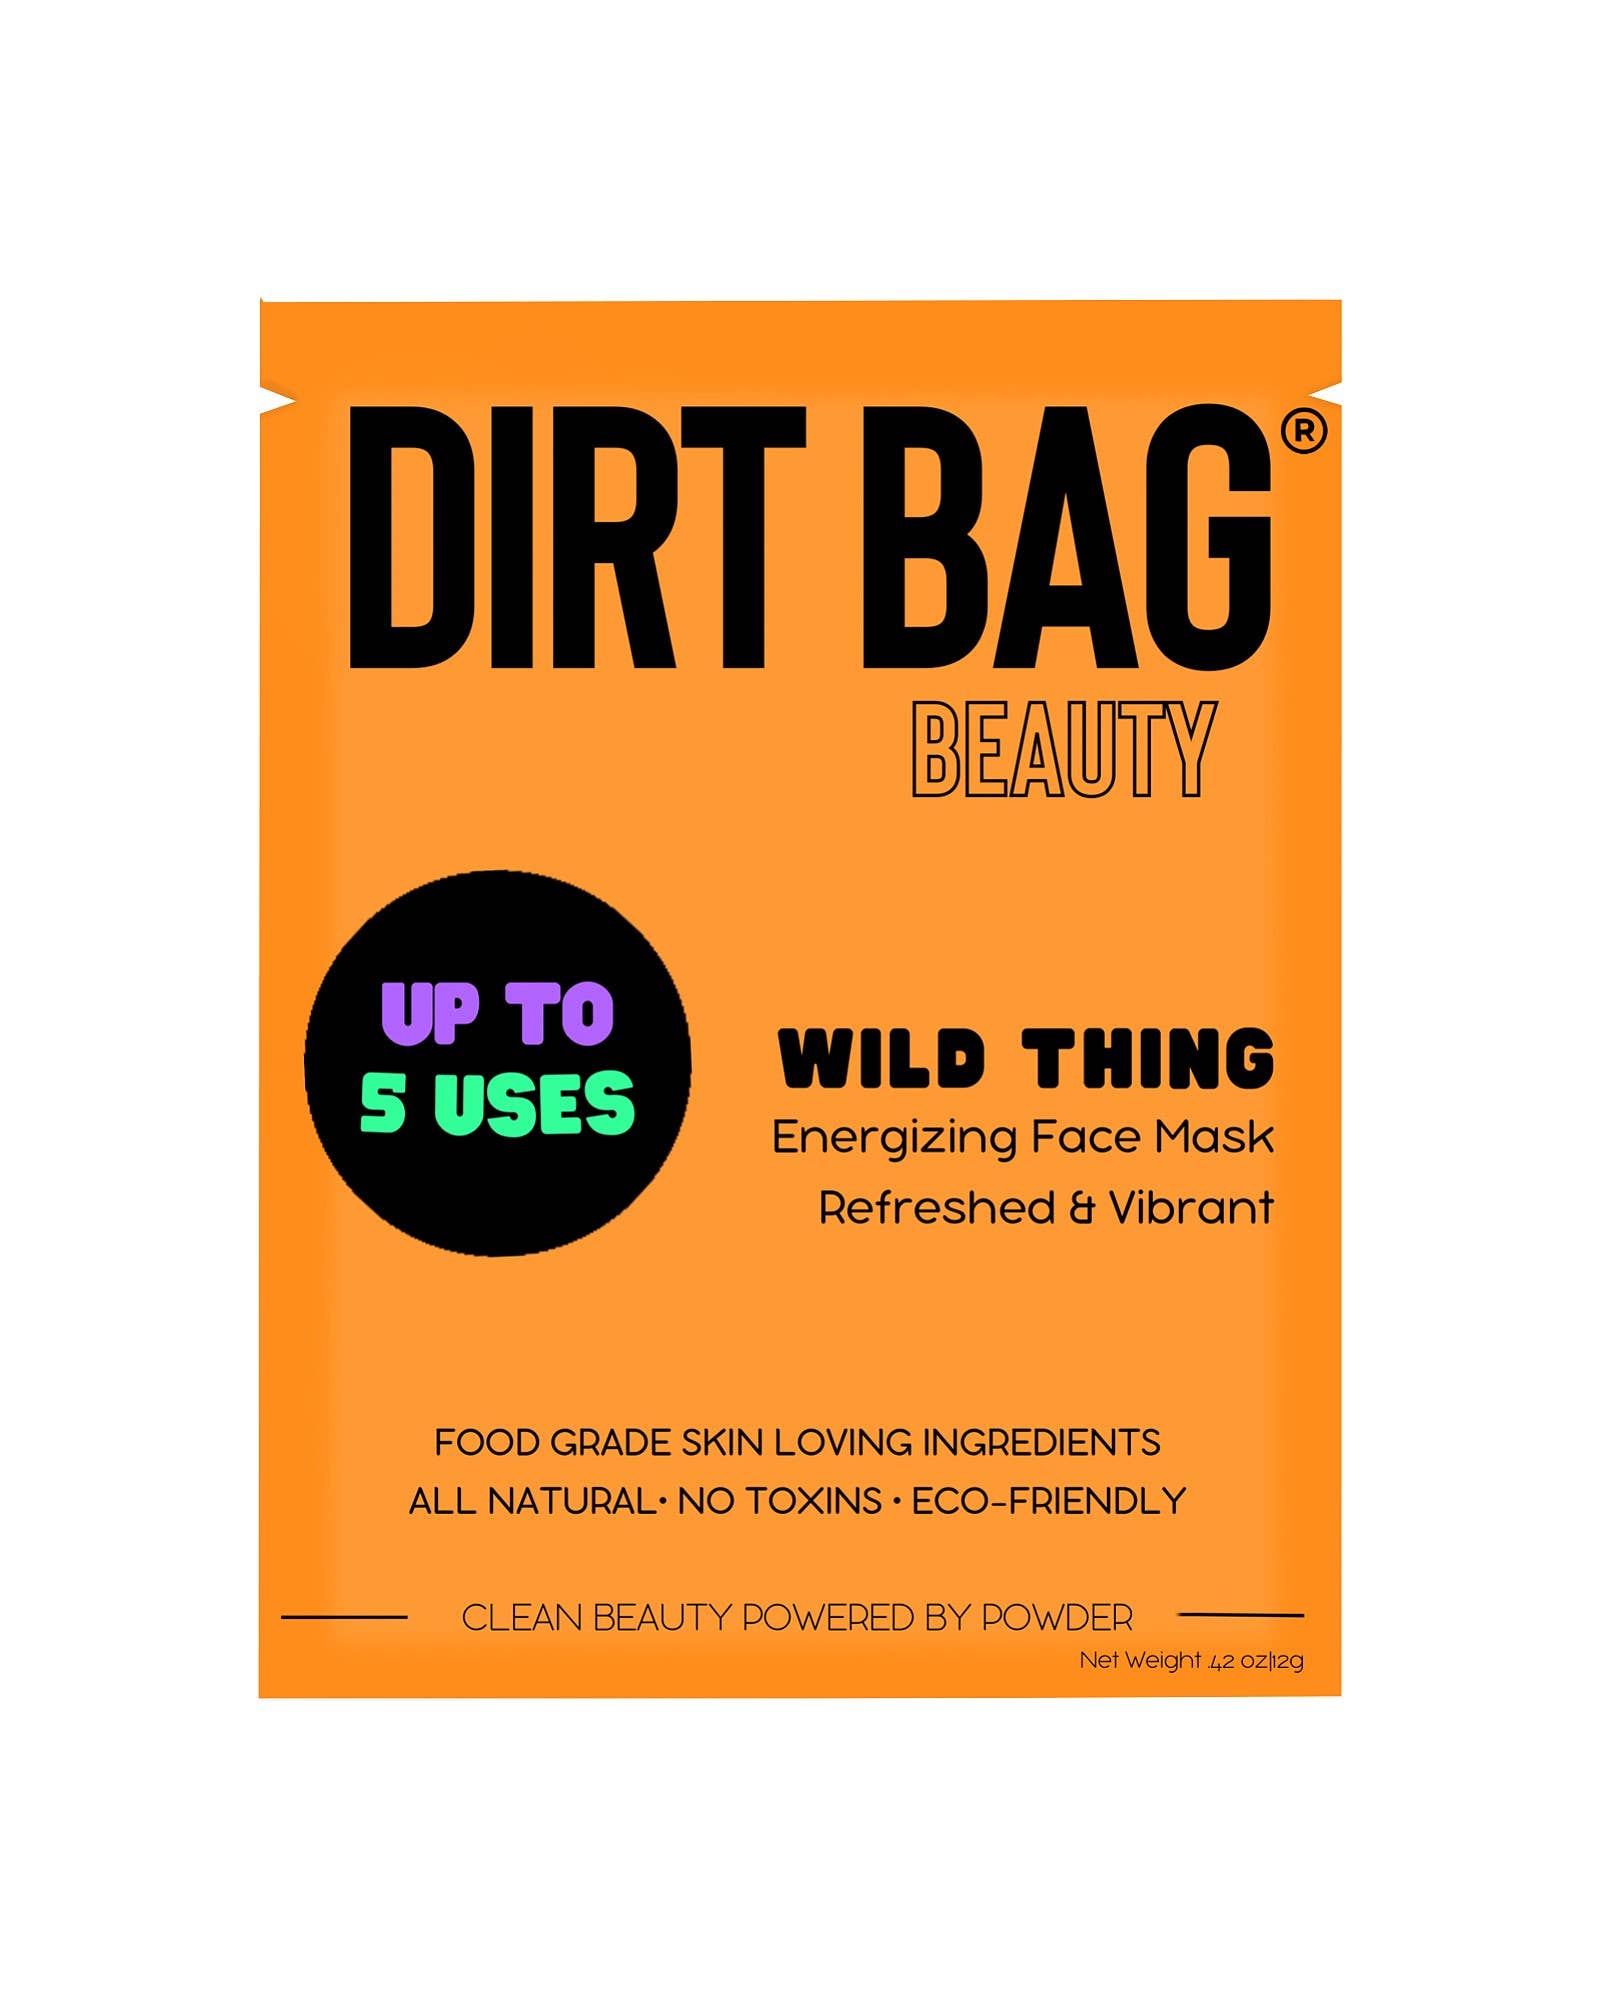 Dirt Bag Royalty-Free Images, Stock Photos & Pictures | Shutterstock